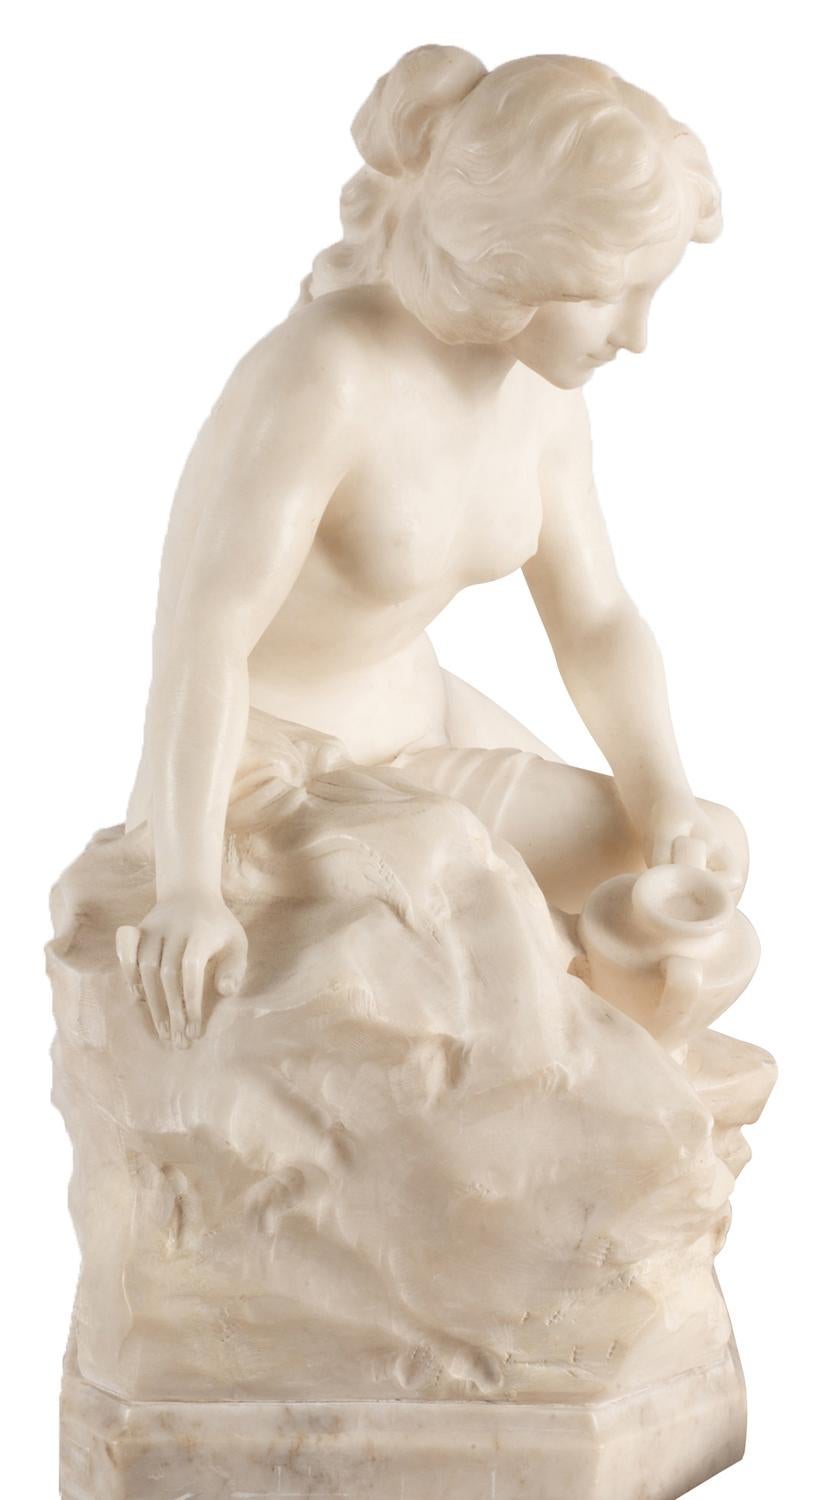 Hand-Carved 19th Century Marble Statue of Seated Nude Collecting Water